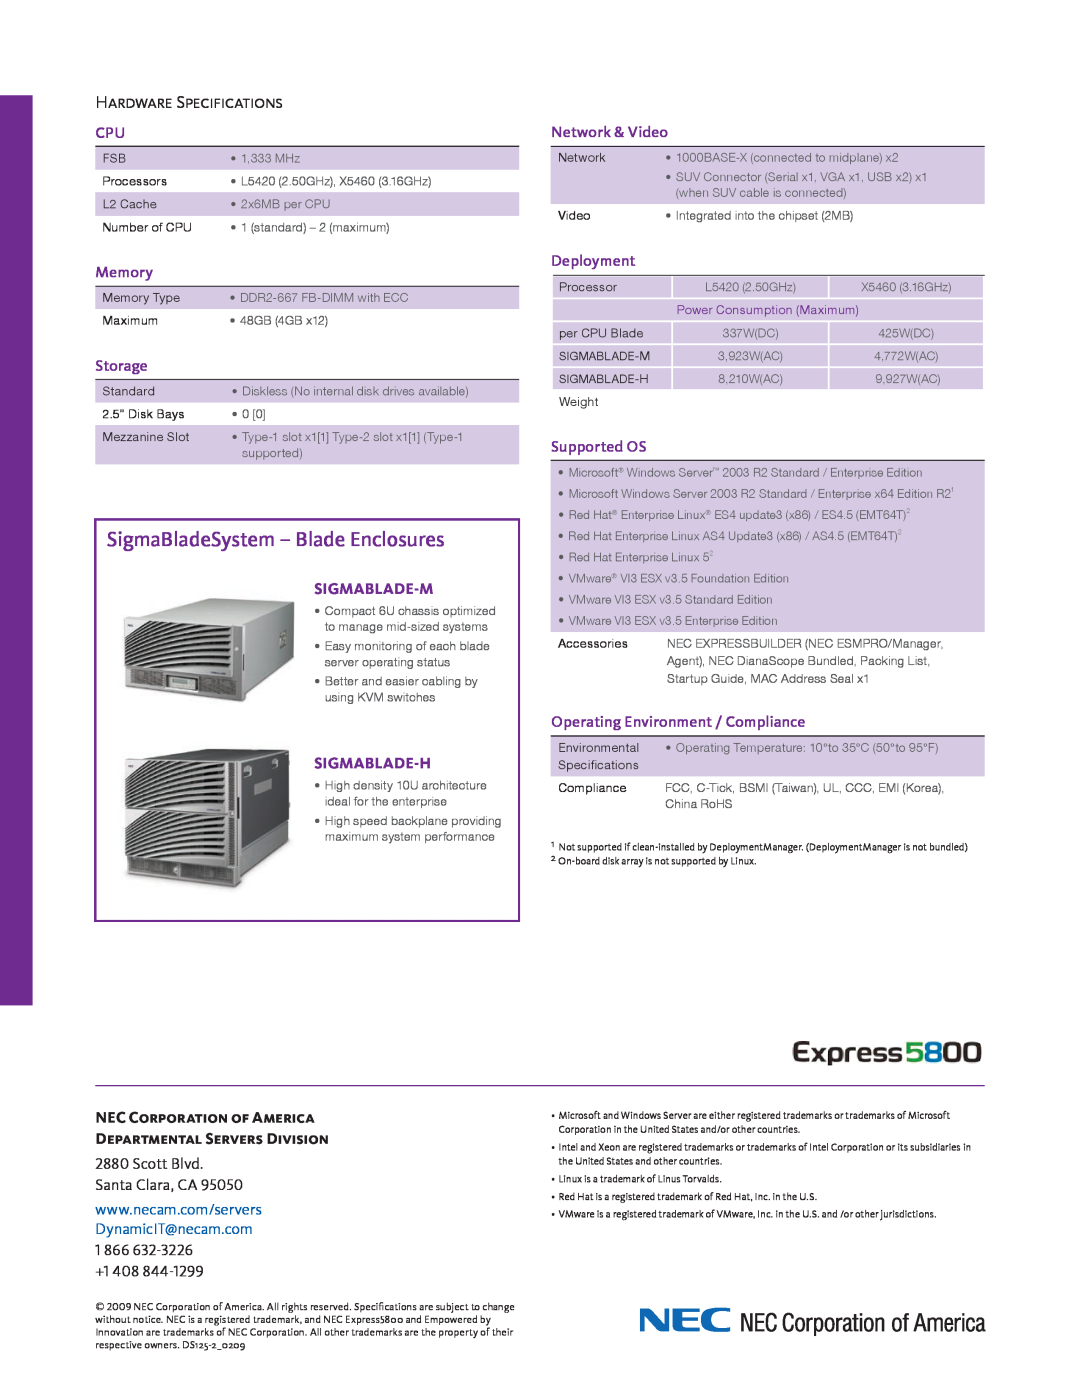 Univex Express5800 manual SigmaBladeSystem - Blade Enclosures, Hardware Specifications, Network & Video, Memory, Storage 